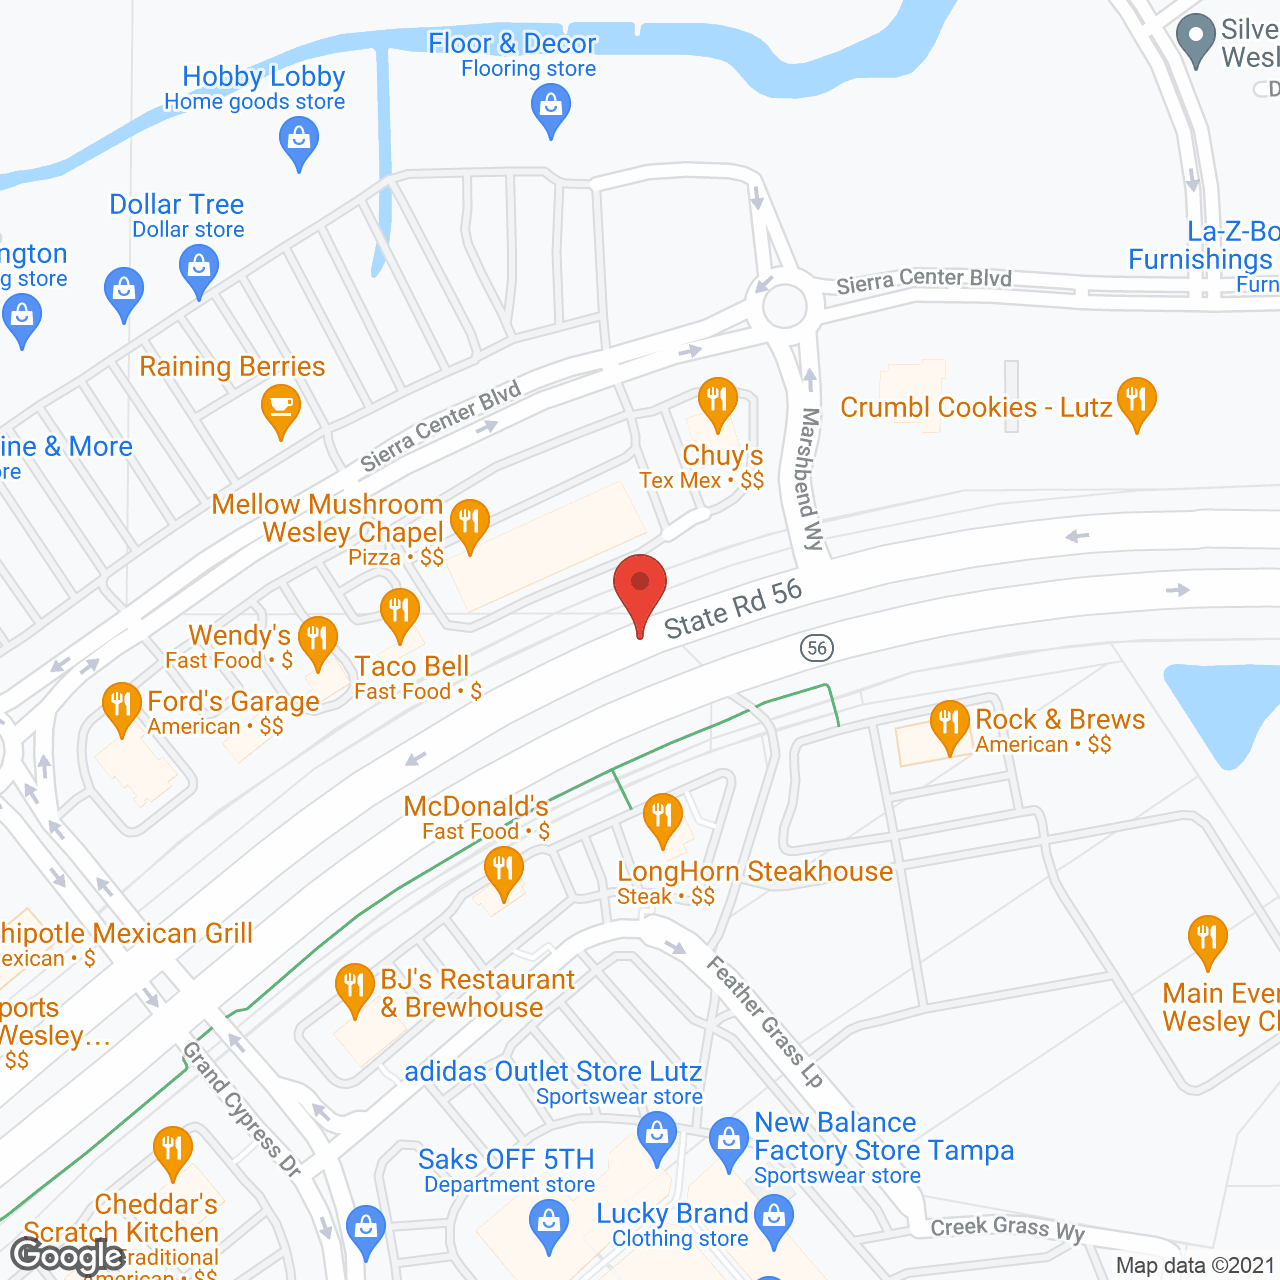 North Tampa Treatment Center For Older Adults in google map